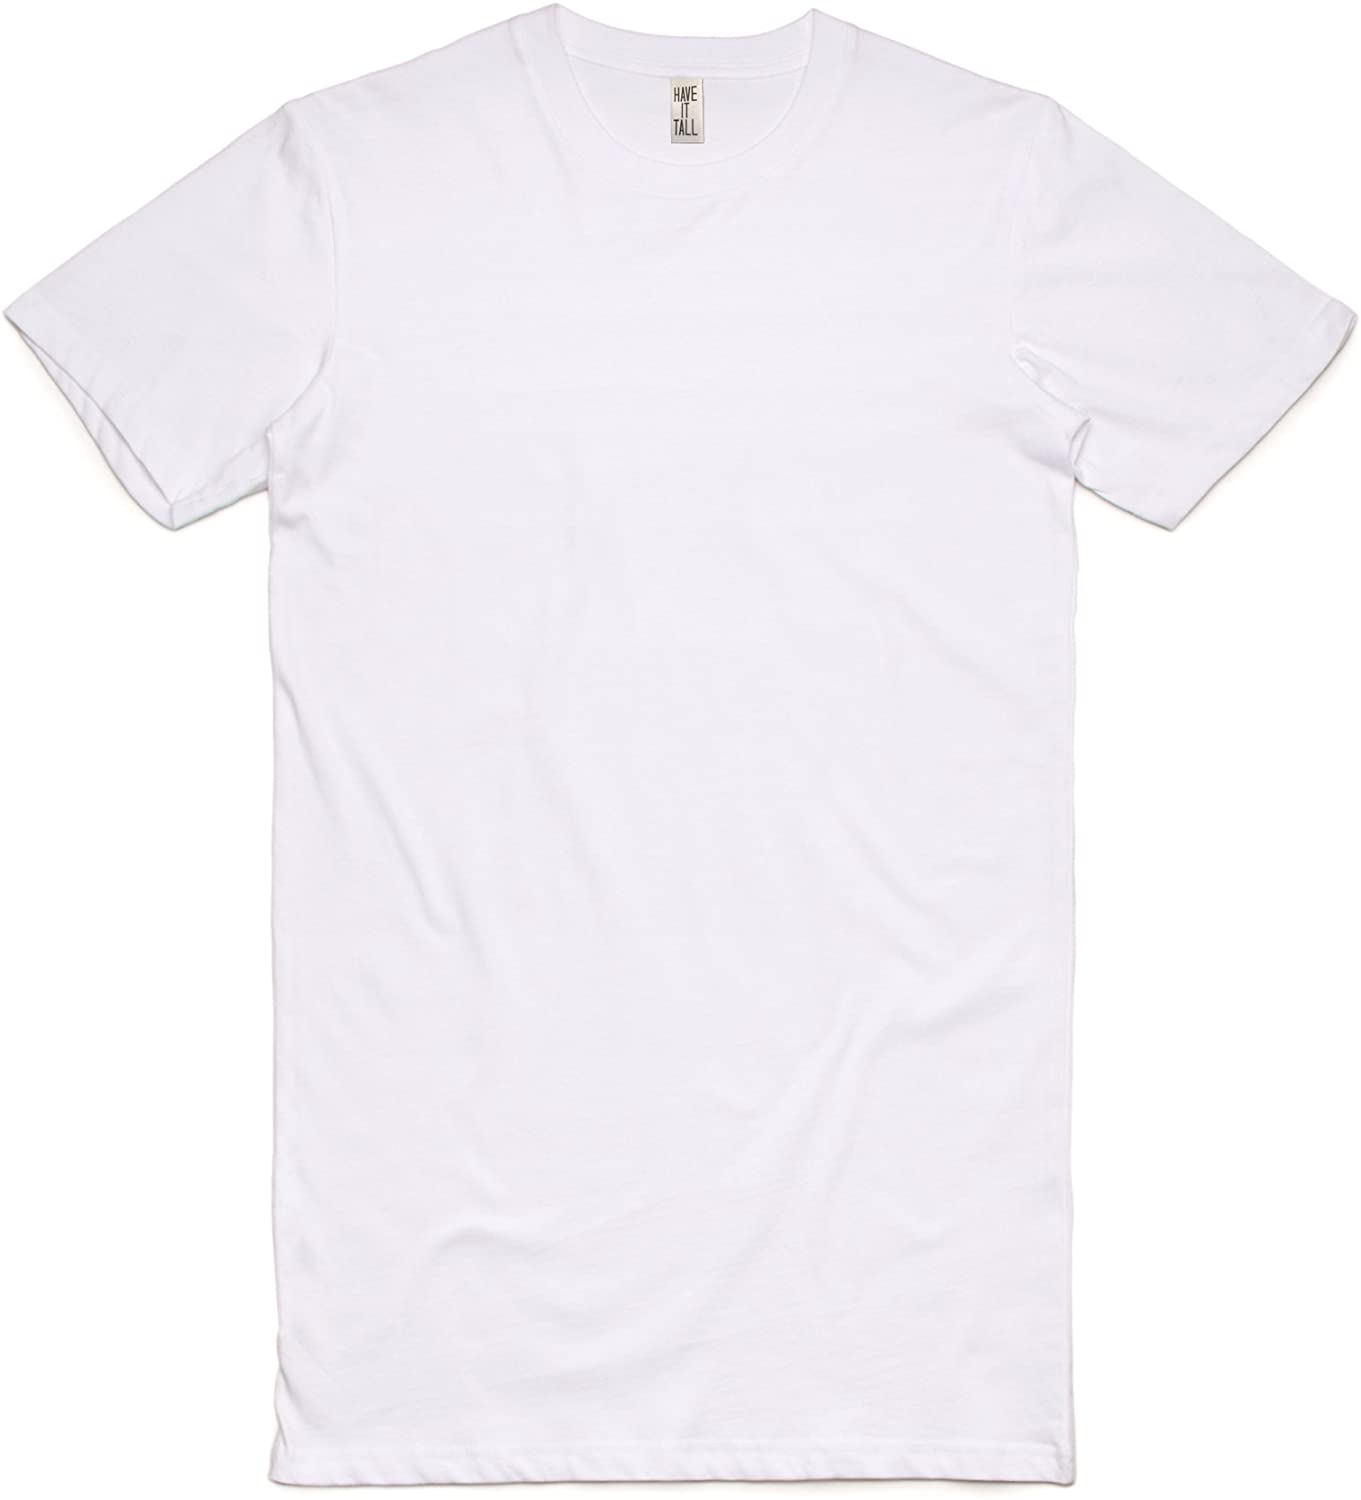 Have It Tall Men's Extra Long T Shirt